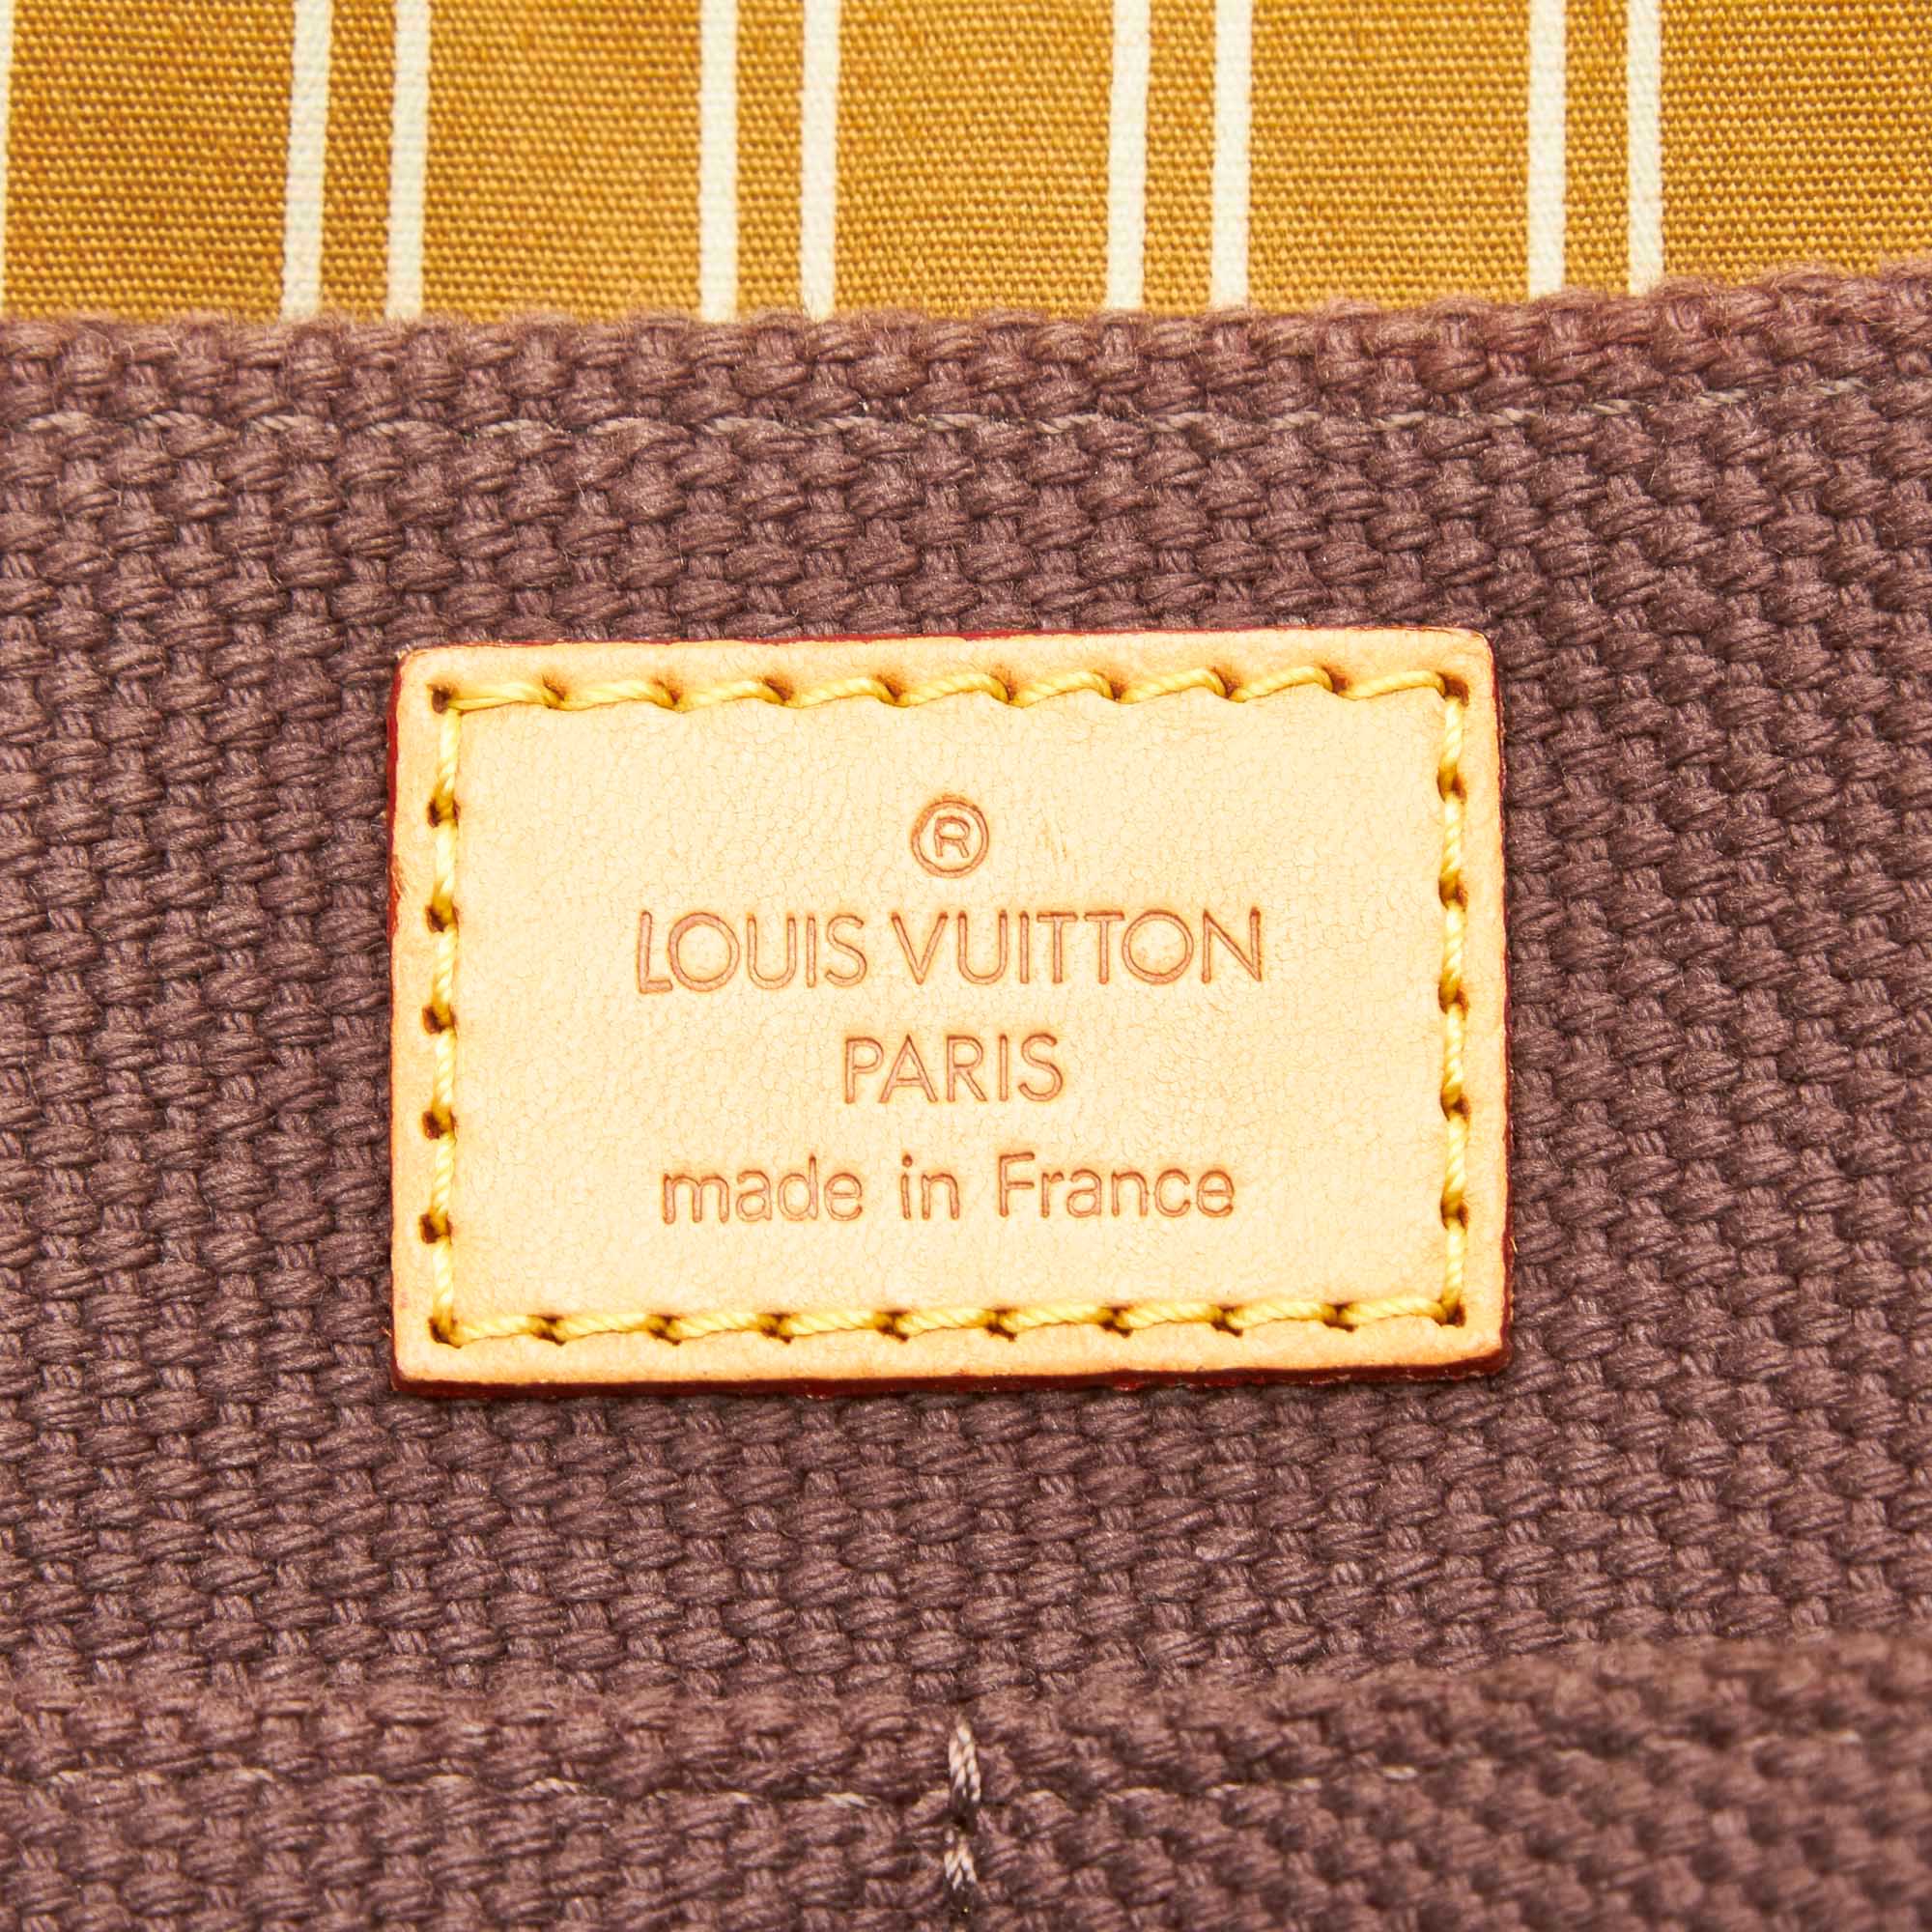 Louis Vuitton Vintage - Antigua Besace PM Bag - Brown Beige - Taiga Leather  and Leather Handbag - Luxury High Quality - Avvenice